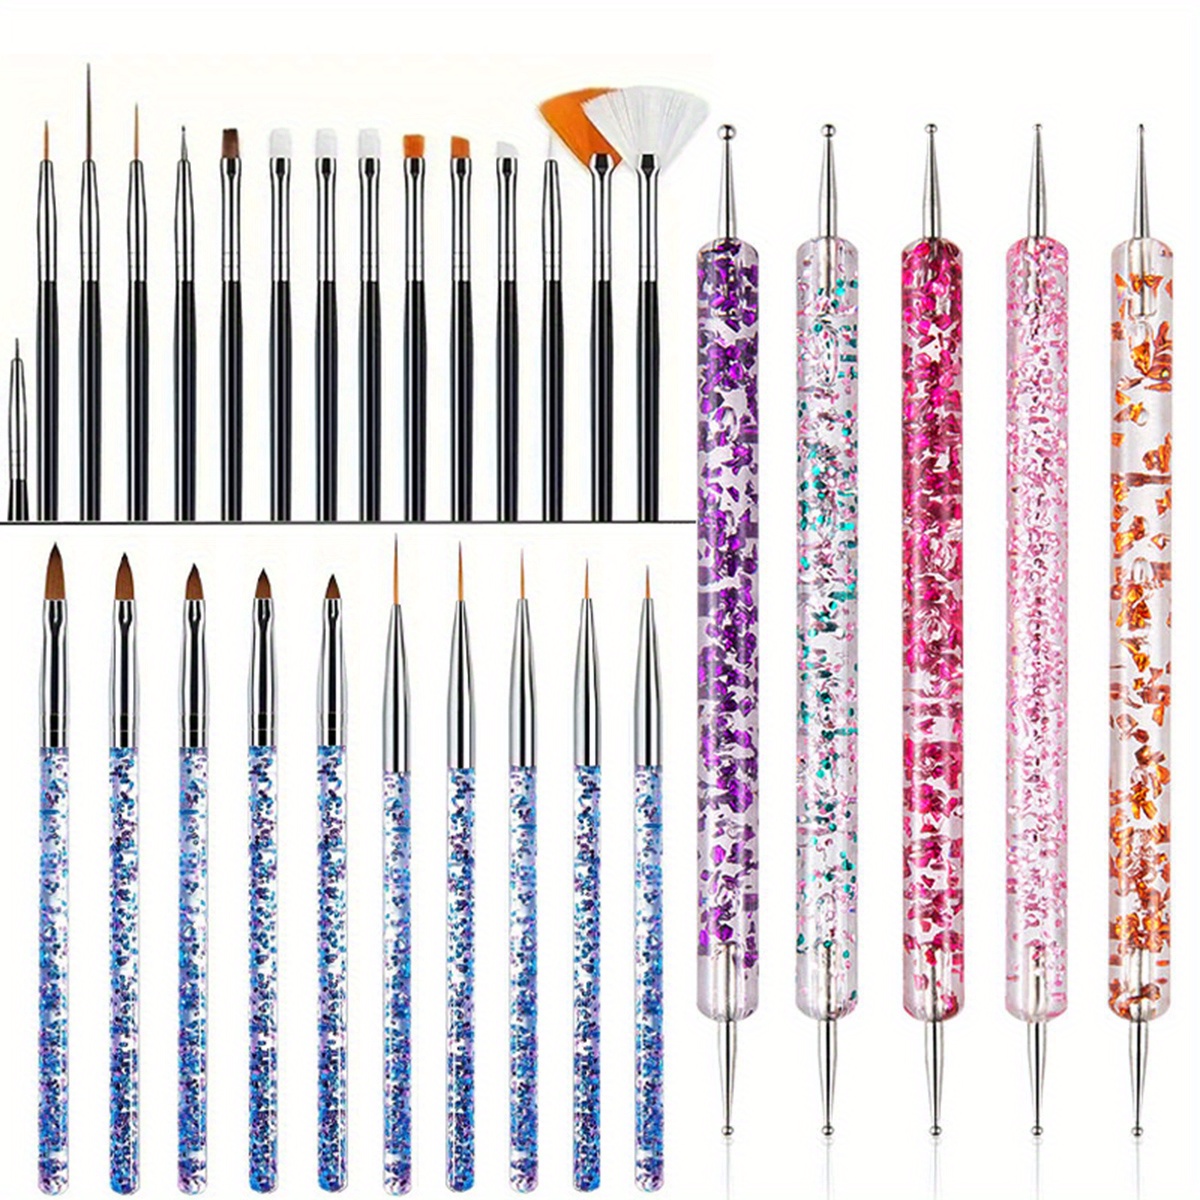 

30pc Nail Art Brushes Set, Floral Silicone Pen & Dual-ended Dotting Tool, Uv Gel Acrylic Painting Carving Liner, Manicure Design Tools With Flat Fan For Nails Decorations